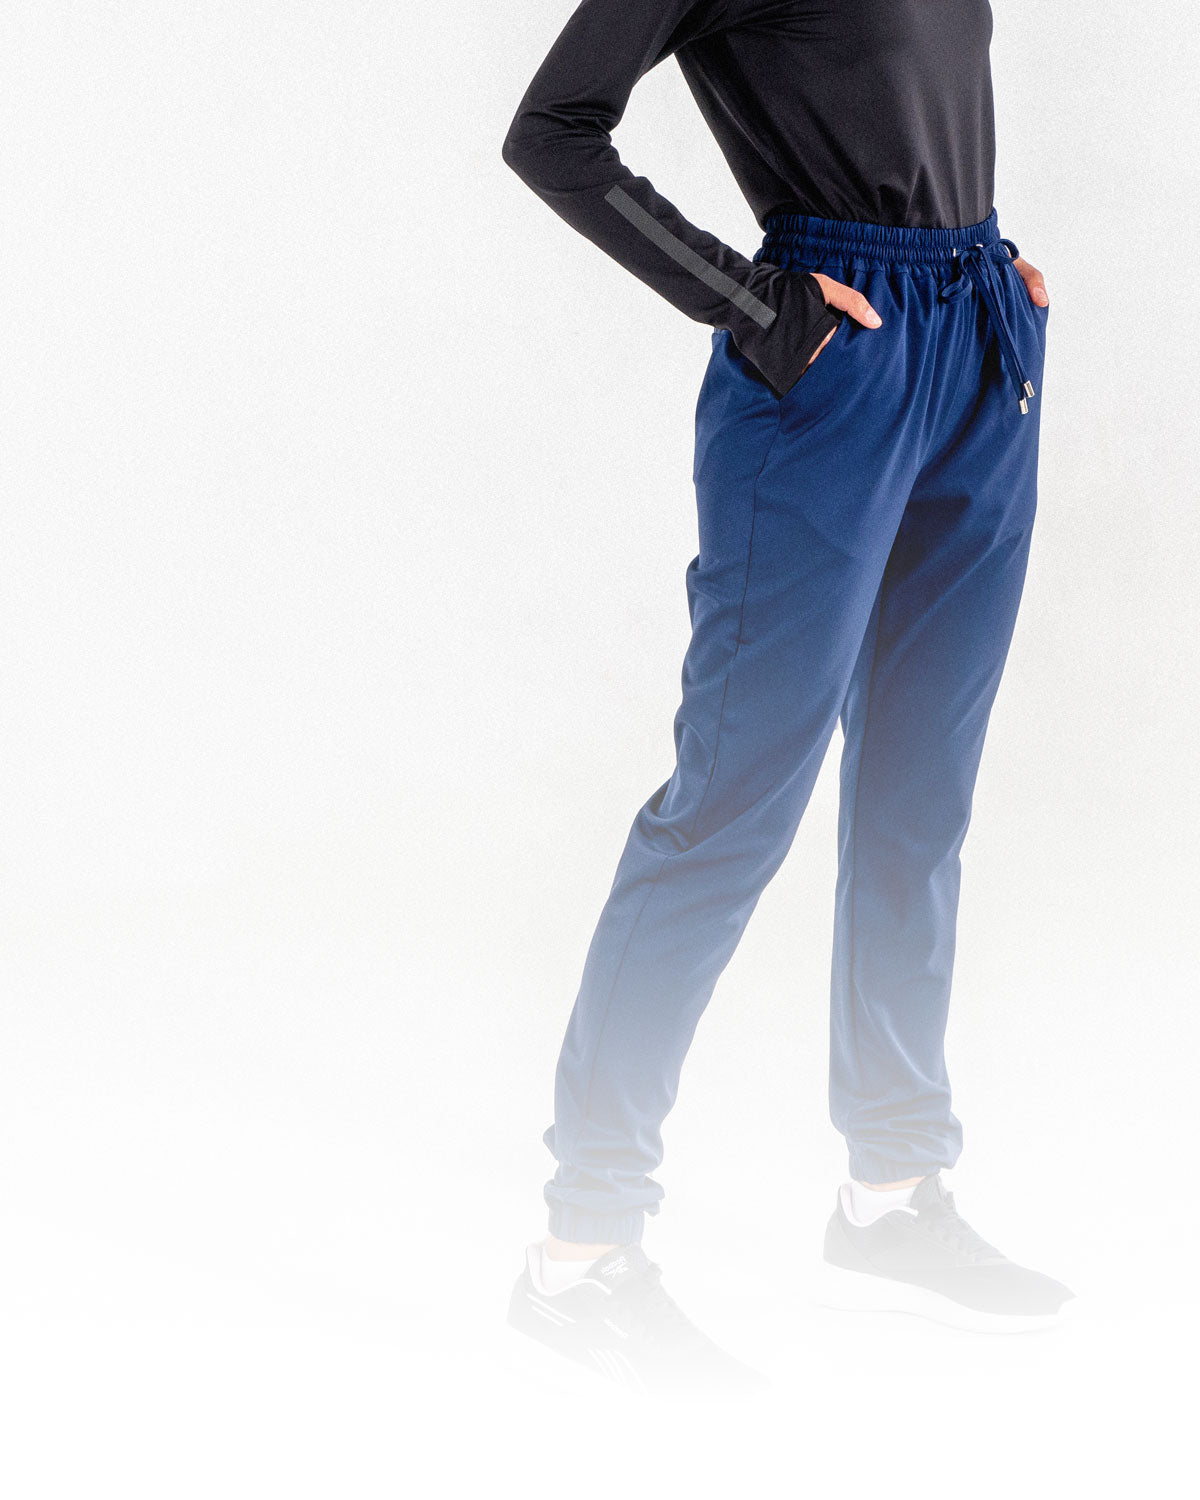 A close-up of the dark blue Glider Drawstring Jogger, a modest activewear jogger from Veil Garments.